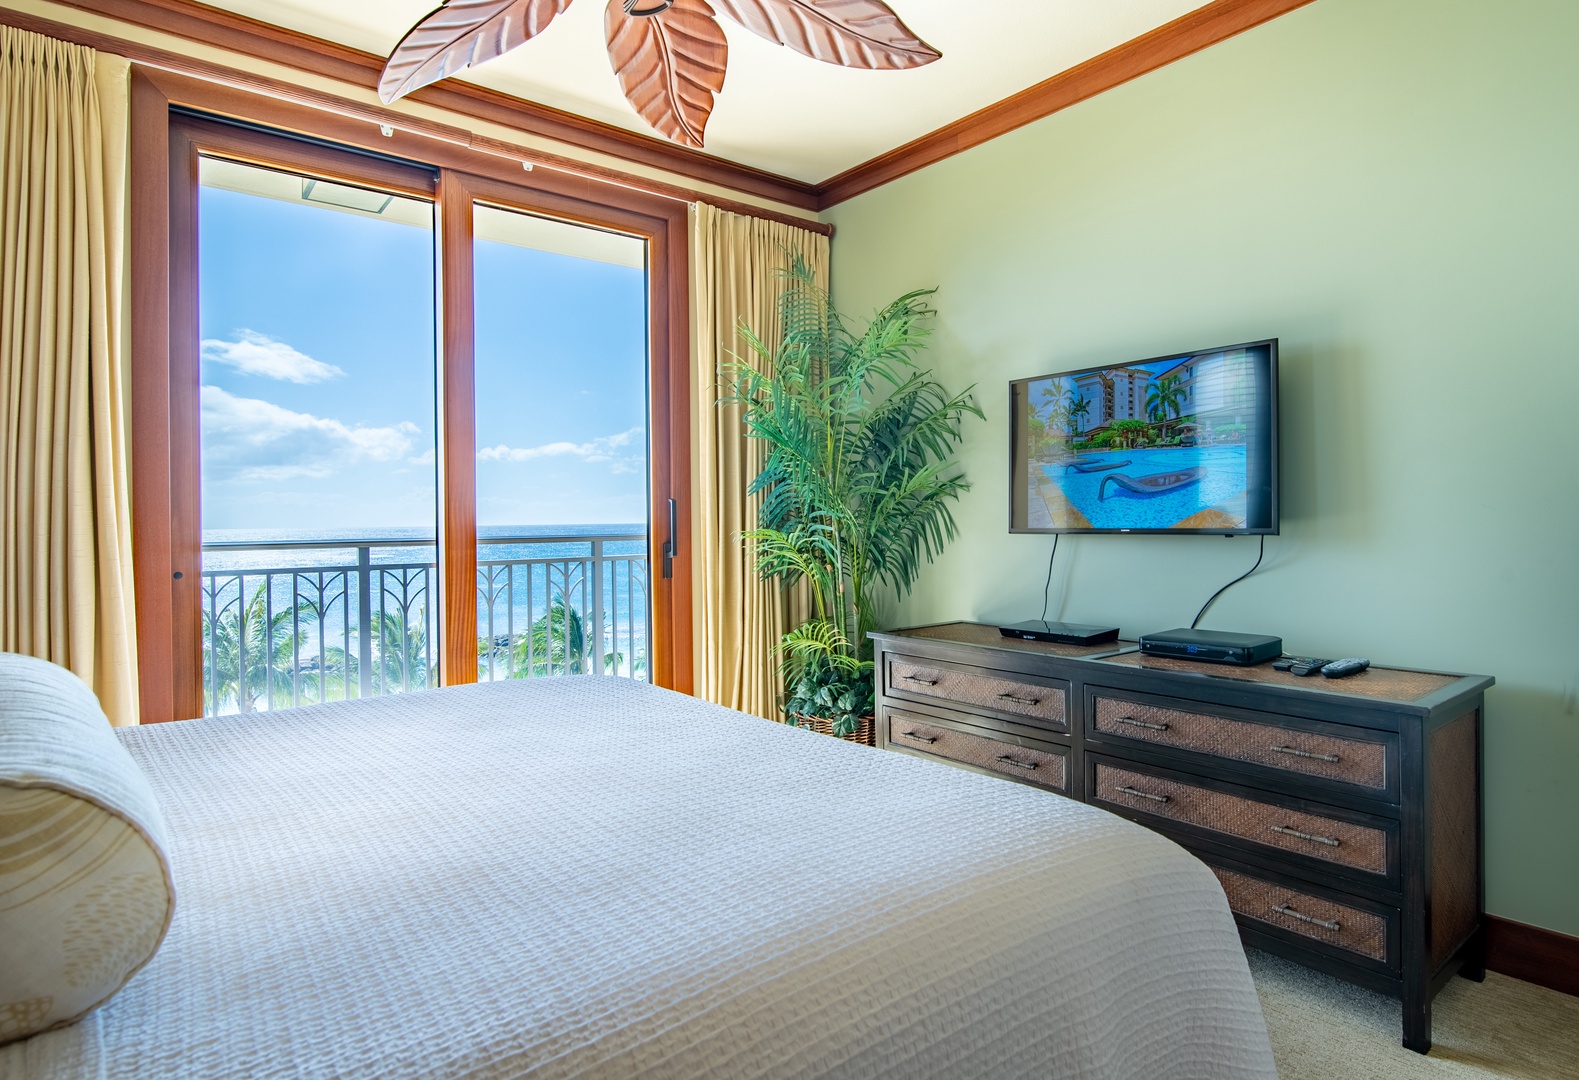 Kapolei Vacation Rentals, Ko Olina Beach Villas B609 - The primary guest bedroom with TV and access to the lanai.